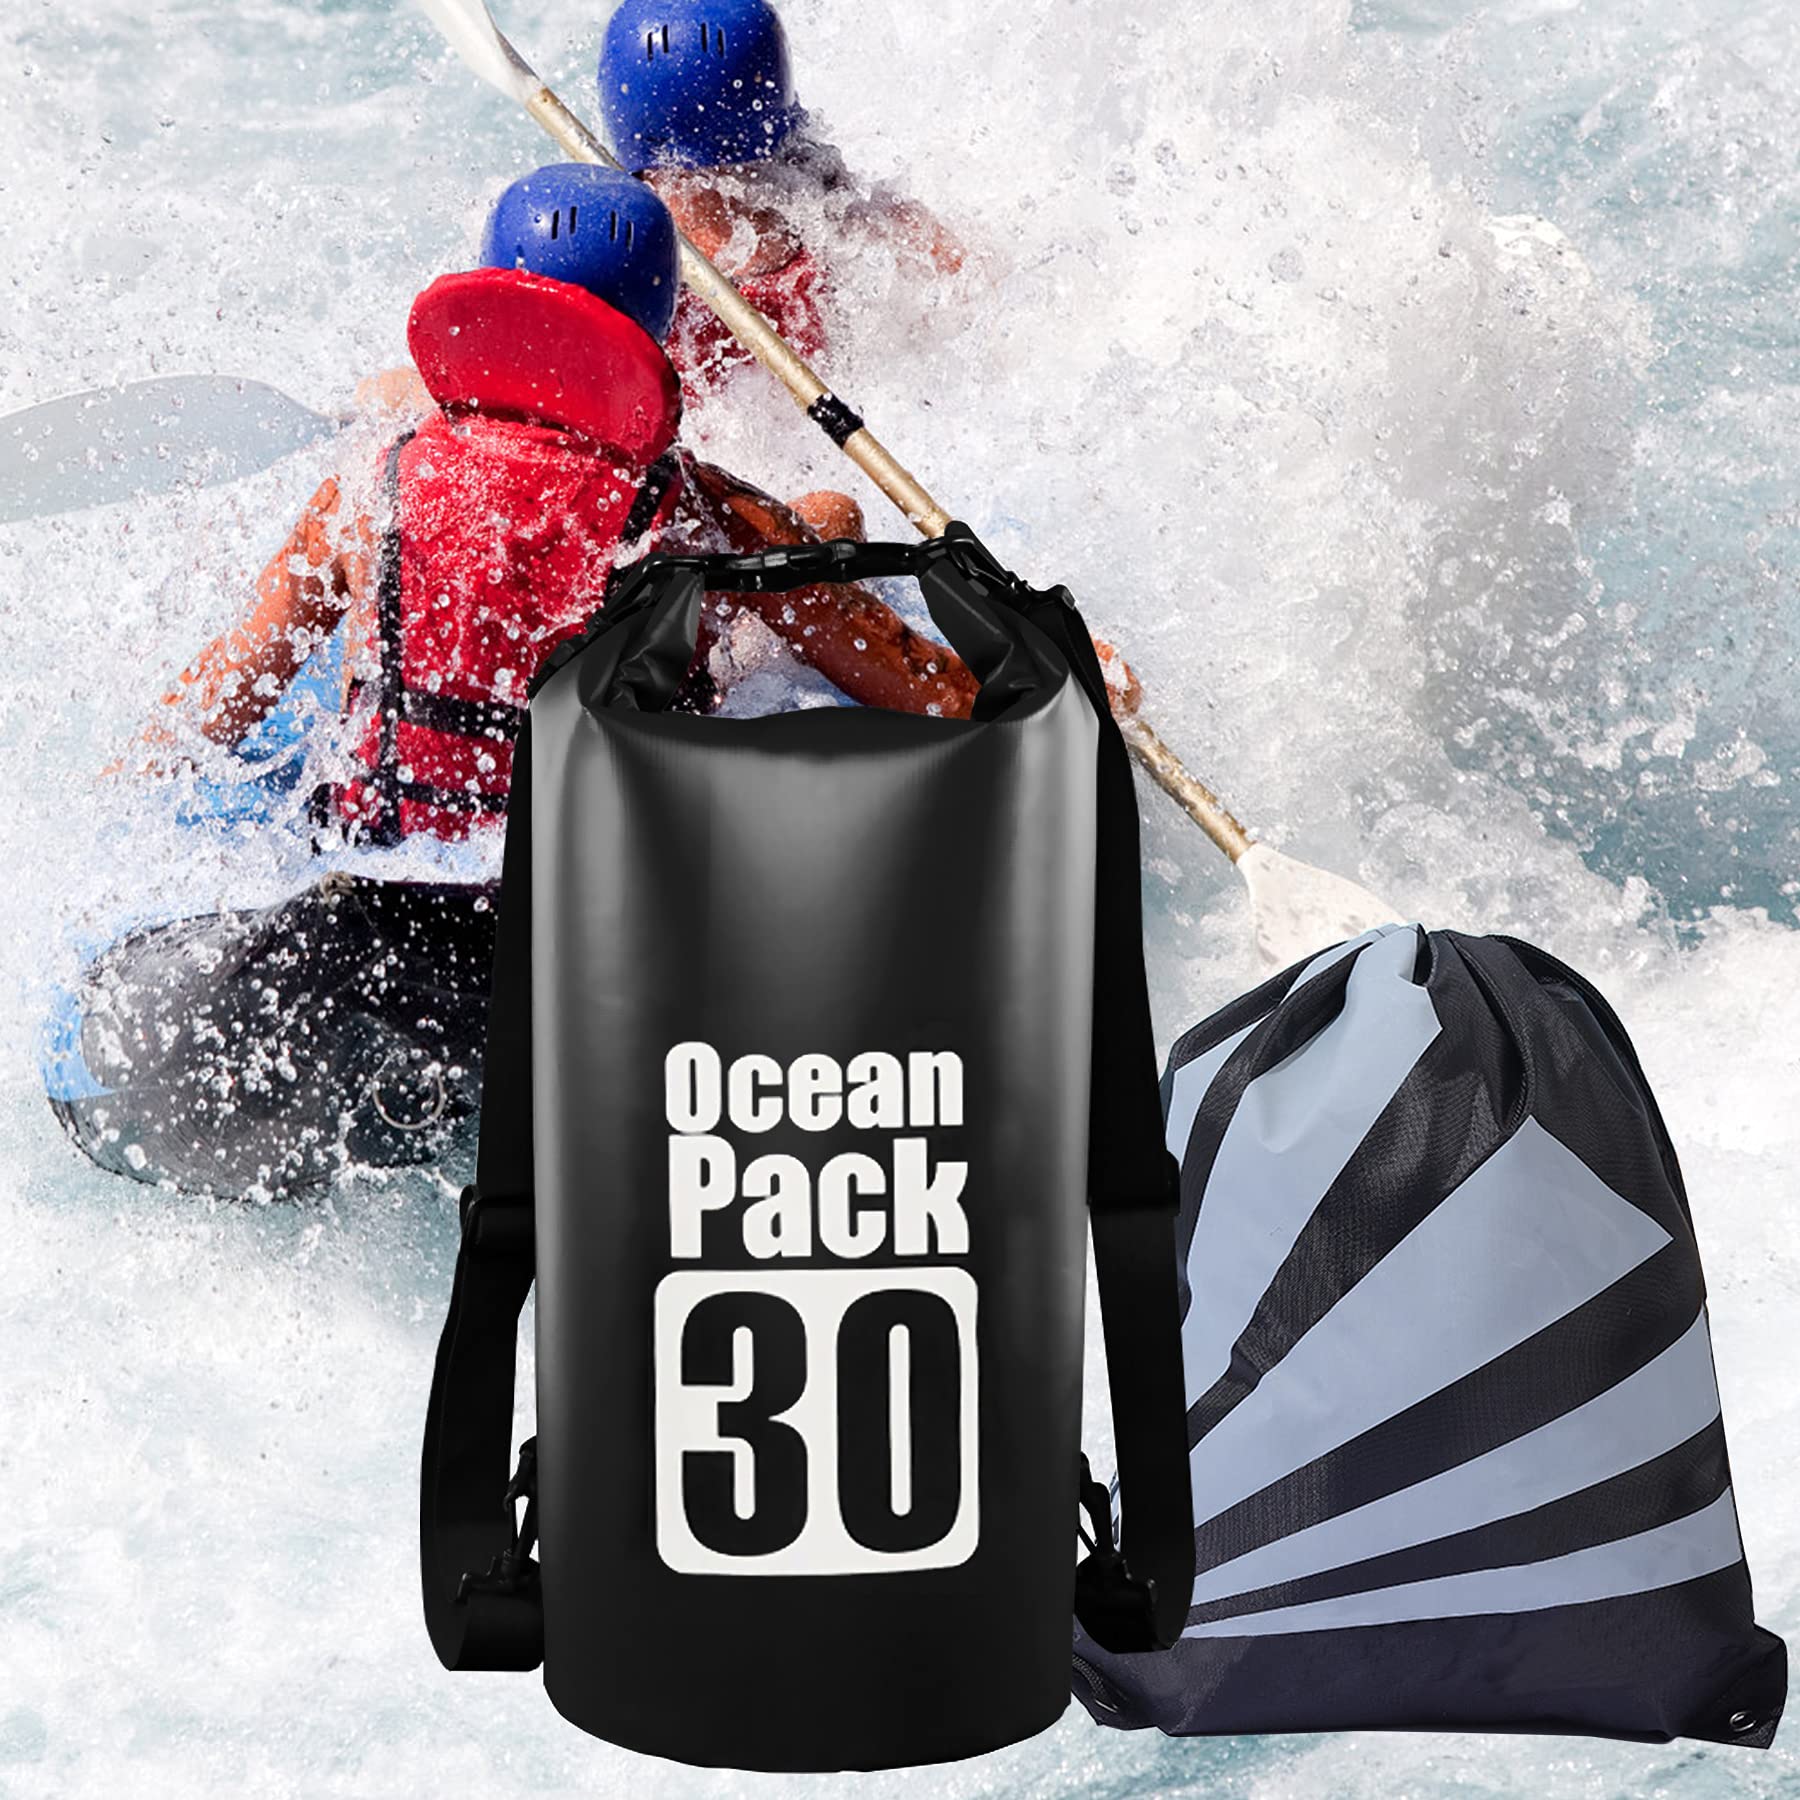 2 Pcs Waterproof Dry Bag,30L Bucket Bag for Outdoor,Swimming Storage,Adjustable Double Shoulders Backpack for Travel Beach Diving Rafting Boating Fishing,Snowboarding,Unisex Sports Drawstring Pocket